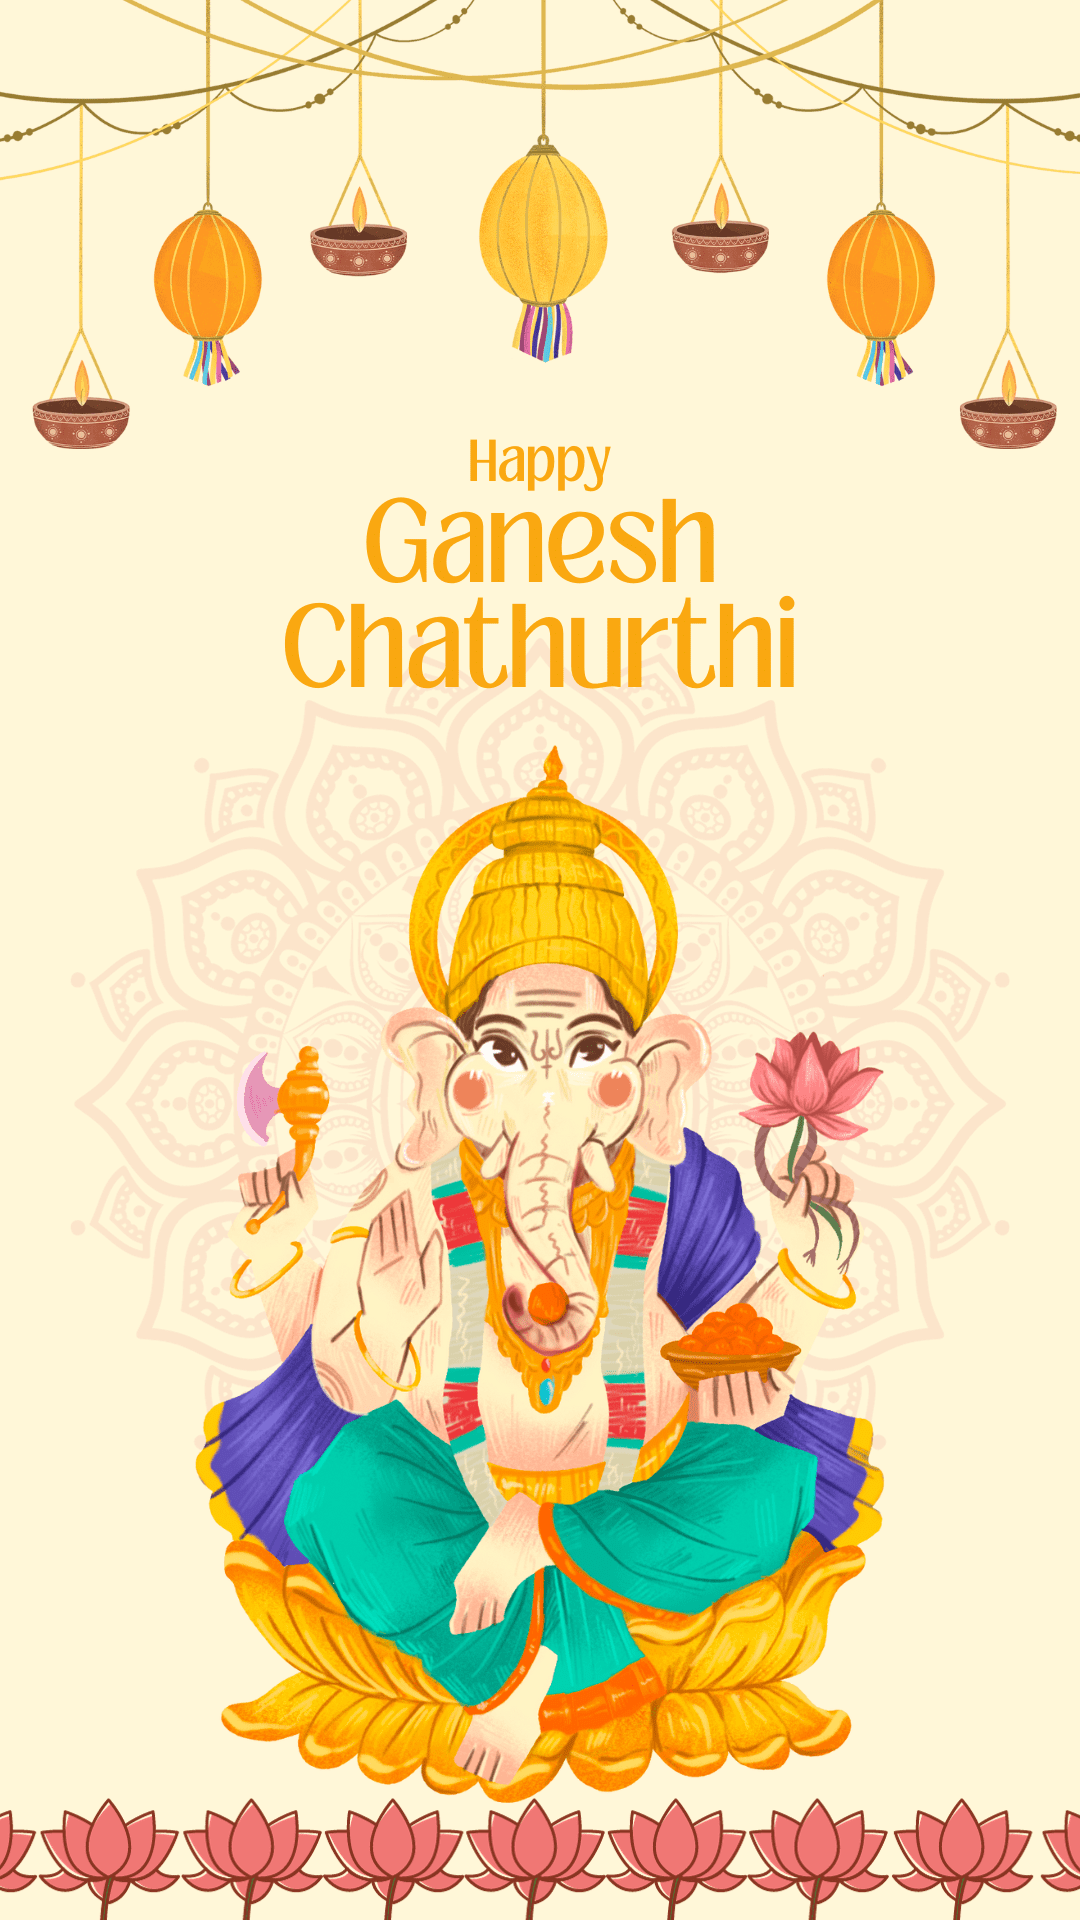 #{"id":1688,"_id":"61f3f785e0f744570541c409","name":"ganesh-chaturthi","count":27,"data":"{\"_id\":{\"$oid\":\"61f3f785e0f744570541c409\"},\"id\":\"960\",\"name\":\"ganesh-chaturthi\",\"created_at\":\"2021-09-08-21:13:25\",\"updated_at\":\"2021-09-08-21:13:25\",\"updatedAt\":{\"$date\":\"2022-01-28T14:33:44.935Z\"},\"count\":27}","deleted_at":null,"created_at":"2021-09-08T09:13:25.000000Z","updated_at":"2021-09-08T09:13:25.000000Z","merge_with":null,"pivot":{"taggable_id":2370,"tag_id":1688,"taggable_type":"App\\Models\\Status"}}, #{"id":2575,"_id":null,"name":"ganesh-chaturthi-2023","count":0,"data":null,"deleted_at":null,"created_at":"2023-09-17T04:05:29.000000Z","updated_at":"2023-09-17T04:05:29.000000Z","merge_with":null,"pivot":{"taggable_id":2370,"tag_id":2575,"taggable_type":"App\\Models\\Status"}}, #{"id":1665,"_id":"61f3f785e0f744570541c3f2","name":"ganesh-chaturthi-images","count":18,"data":"{\"_id\":{\"$oid\":\"61f3f785e0f744570541c3f2\"},\"id\":\"937\",\"name\":\"ganesh-chaturthi-images\",\"created_at\":\"2021-09-08-21:08:14\",\"updated_at\":\"2021-09-08-21:08:14\",\"updatedAt\":{\"$date\":\"2022-01-28T14:33:44.935Z\"},\"count\":18}","deleted_at":null,"created_at":"2021-09-08T09:08:14.000000Z","updated_at":"2021-09-08T09:08:14.000000Z","merge_with":null,"pivot":{"taggable_id":2370,"tag_id":1665,"taggable_type":"App\\Models\\Status"}}, #{"id":1668,"_id":"61f3f785e0f744570541c3f5","name":"ganesh-chaturthi-pics","count":18,"data":"{\"_id\":{\"$oid\":\"61f3f785e0f744570541c3f5\"},\"id\":\"940\",\"name\":\"ganesh-chaturthi-pics\",\"created_at\":\"2021-09-08-21:08:14\",\"updated_at\":\"2021-09-08-21:08:14\",\"updatedAt\":{\"$date\":\"2022-01-28T14:33:44.935Z\"},\"count\":18}","deleted_at":null,"created_at":"2021-09-08T09:08:14.000000Z","updated_at":"2021-09-08T09:08:14.000000Z","merge_with":null,"pivot":{"taggable_id":2370,"tag_id":1668,"taggable_type":"App\\Models\\Status"}}, #{"id":1667,"_id":"61f3f785e0f744570541c3f4","name":"ganesh-chaturthi-pictures","count":18,"data":"{\"_id\":{\"$oid\":\"61f3f785e0f744570541c3f4\"},\"id\":\"939\",\"name\":\"ganesh-chaturthi-pictures\",\"created_at\":\"2021-09-08-21:08:14\",\"updated_at\":\"2021-09-08-21:08:14\",\"updatedAt\":{\"$date\":\"2022-01-28T14:33:44.935Z\"},\"count\":18}","deleted_at":null,"created_at":"2021-09-08T09:08:14.000000Z","updated_at":"2021-09-08T09:08:14.000000Z","merge_with":null,"pivot":{"taggable_id":2370,"tag_id":1667,"taggable_type":"App\\Models\\Status"}}, #{"id":1677,"_id":"61f3f785e0f744570541c3fe","name":"ganesh-chaturthi-quotes","count":12,"data":"{\"_id\":{\"$oid\":\"61f3f785e0f744570541c3fe\"},\"id\":\"949\",\"name\":\"ganesh-chaturthi-quotes\",\"created_at\":\"2021-09-08-21:08:40\",\"updated_at\":\"2021-09-08-21:08:40\",\"updatedAt\":{\"$date\":\"2022-01-28T14:33:44.935Z\"},\"count\":12}","deleted_at":null,"created_at":"2021-09-08T09:08:40.000000Z","updated_at":"2021-09-08T09:08:40.000000Z","merge_with":null,"pivot":{"taggable_id":2370,"tag_id":1677,"taggable_type":"App\\Models\\Status"}}, #{"id":1674,"_id":"61f3f785e0f744570541c3fb","name":"ganesh-chaturthi-shayari","count":12,"data":"{\"_id\":{\"$oid\":\"61f3f785e0f744570541c3fb\"},\"id\":\"946\",\"name\":\"ganesh-chaturthi-shayari\",\"created_at\":\"2021-09-08-21:08:40\",\"updated_at\":\"2021-09-08-21:08:40\",\"updatedAt\":{\"$date\":\"2022-01-28T14:33:44.935Z\"},\"count\":12}","deleted_at":null,"created_at":"2021-09-08T09:08:40.000000Z","updated_at":"2021-09-08T09:08:40.000000Z","merge_with":null,"pivot":{"taggable_id":2370,"tag_id":1674,"taggable_type":"App\\Models\\Status"}}, #{"id":1678,"_id":"61f3f785e0f744570541c3ff","name":"ganesh-chaturthi-status","count":12,"data":"{\"_id\":{\"$oid\":\"61f3f785e0f744570541c3ff\"},\"id\":\"950\",\"name\":\"ganesh-chaturthi-status\",\"created_at\":\"2021-09-08-21:08:40\",\"updated_at\":\"2021-09-08-21:08:40\",\"updatedAt\":{\"$date\":\"2022-01-28T14:33:44.935Z\"},\"count\":12}","deleted_at":null,"created_at":"2021-09-08T09:08:40.000000Z","updated_at":"2021-09-08T09:08:40.000000Z","merge_with":null,"pivot":{"taggable_id":2370,"tag_id":1678,"taggable_type":"App\\Models\\Status"}}